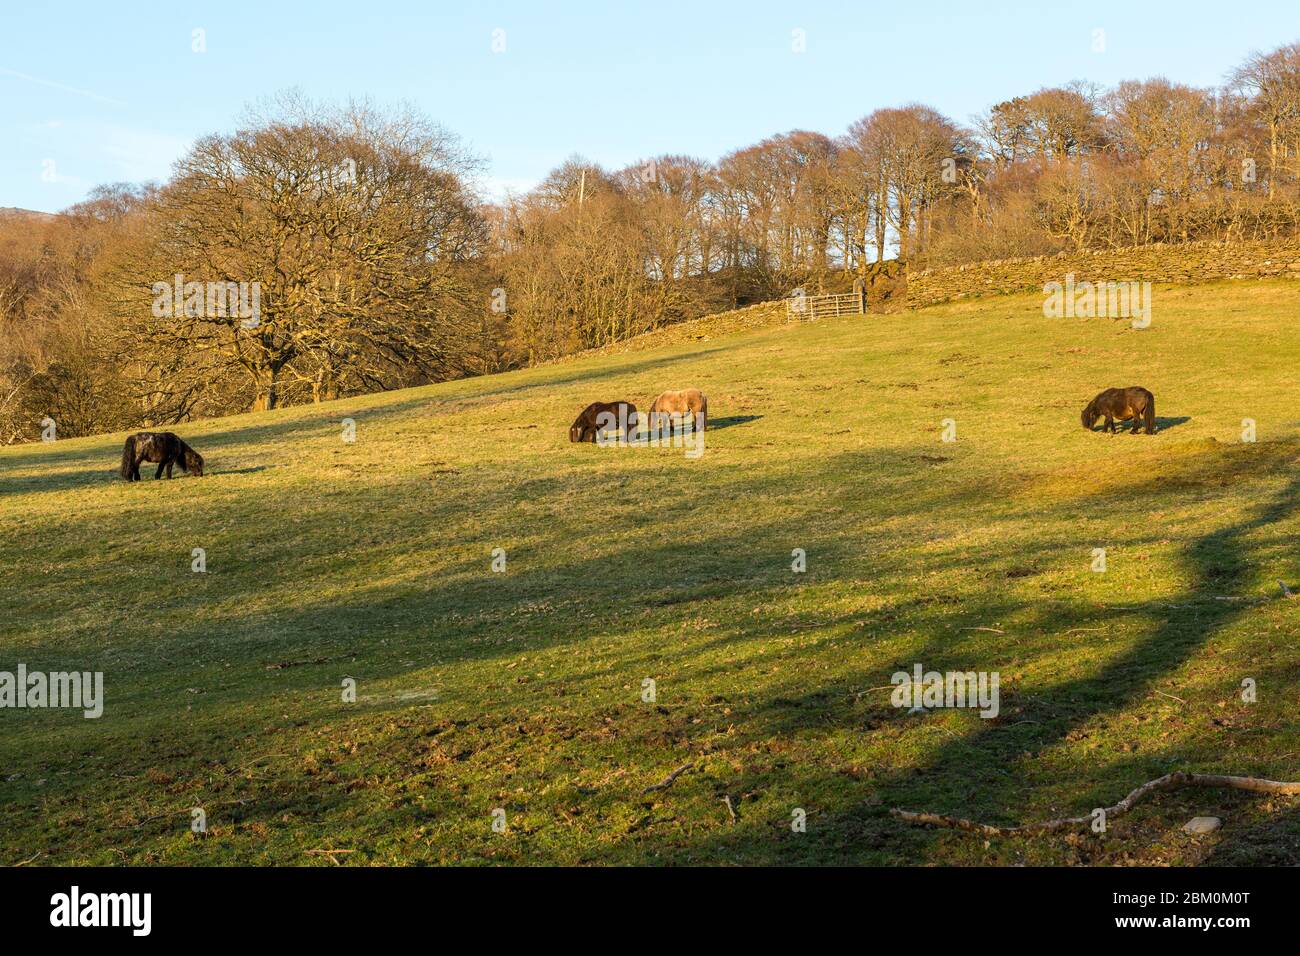 Scenic mountain view of horses in a field in early spring, Snowdonia National Park, Wales, UK Stock Photo